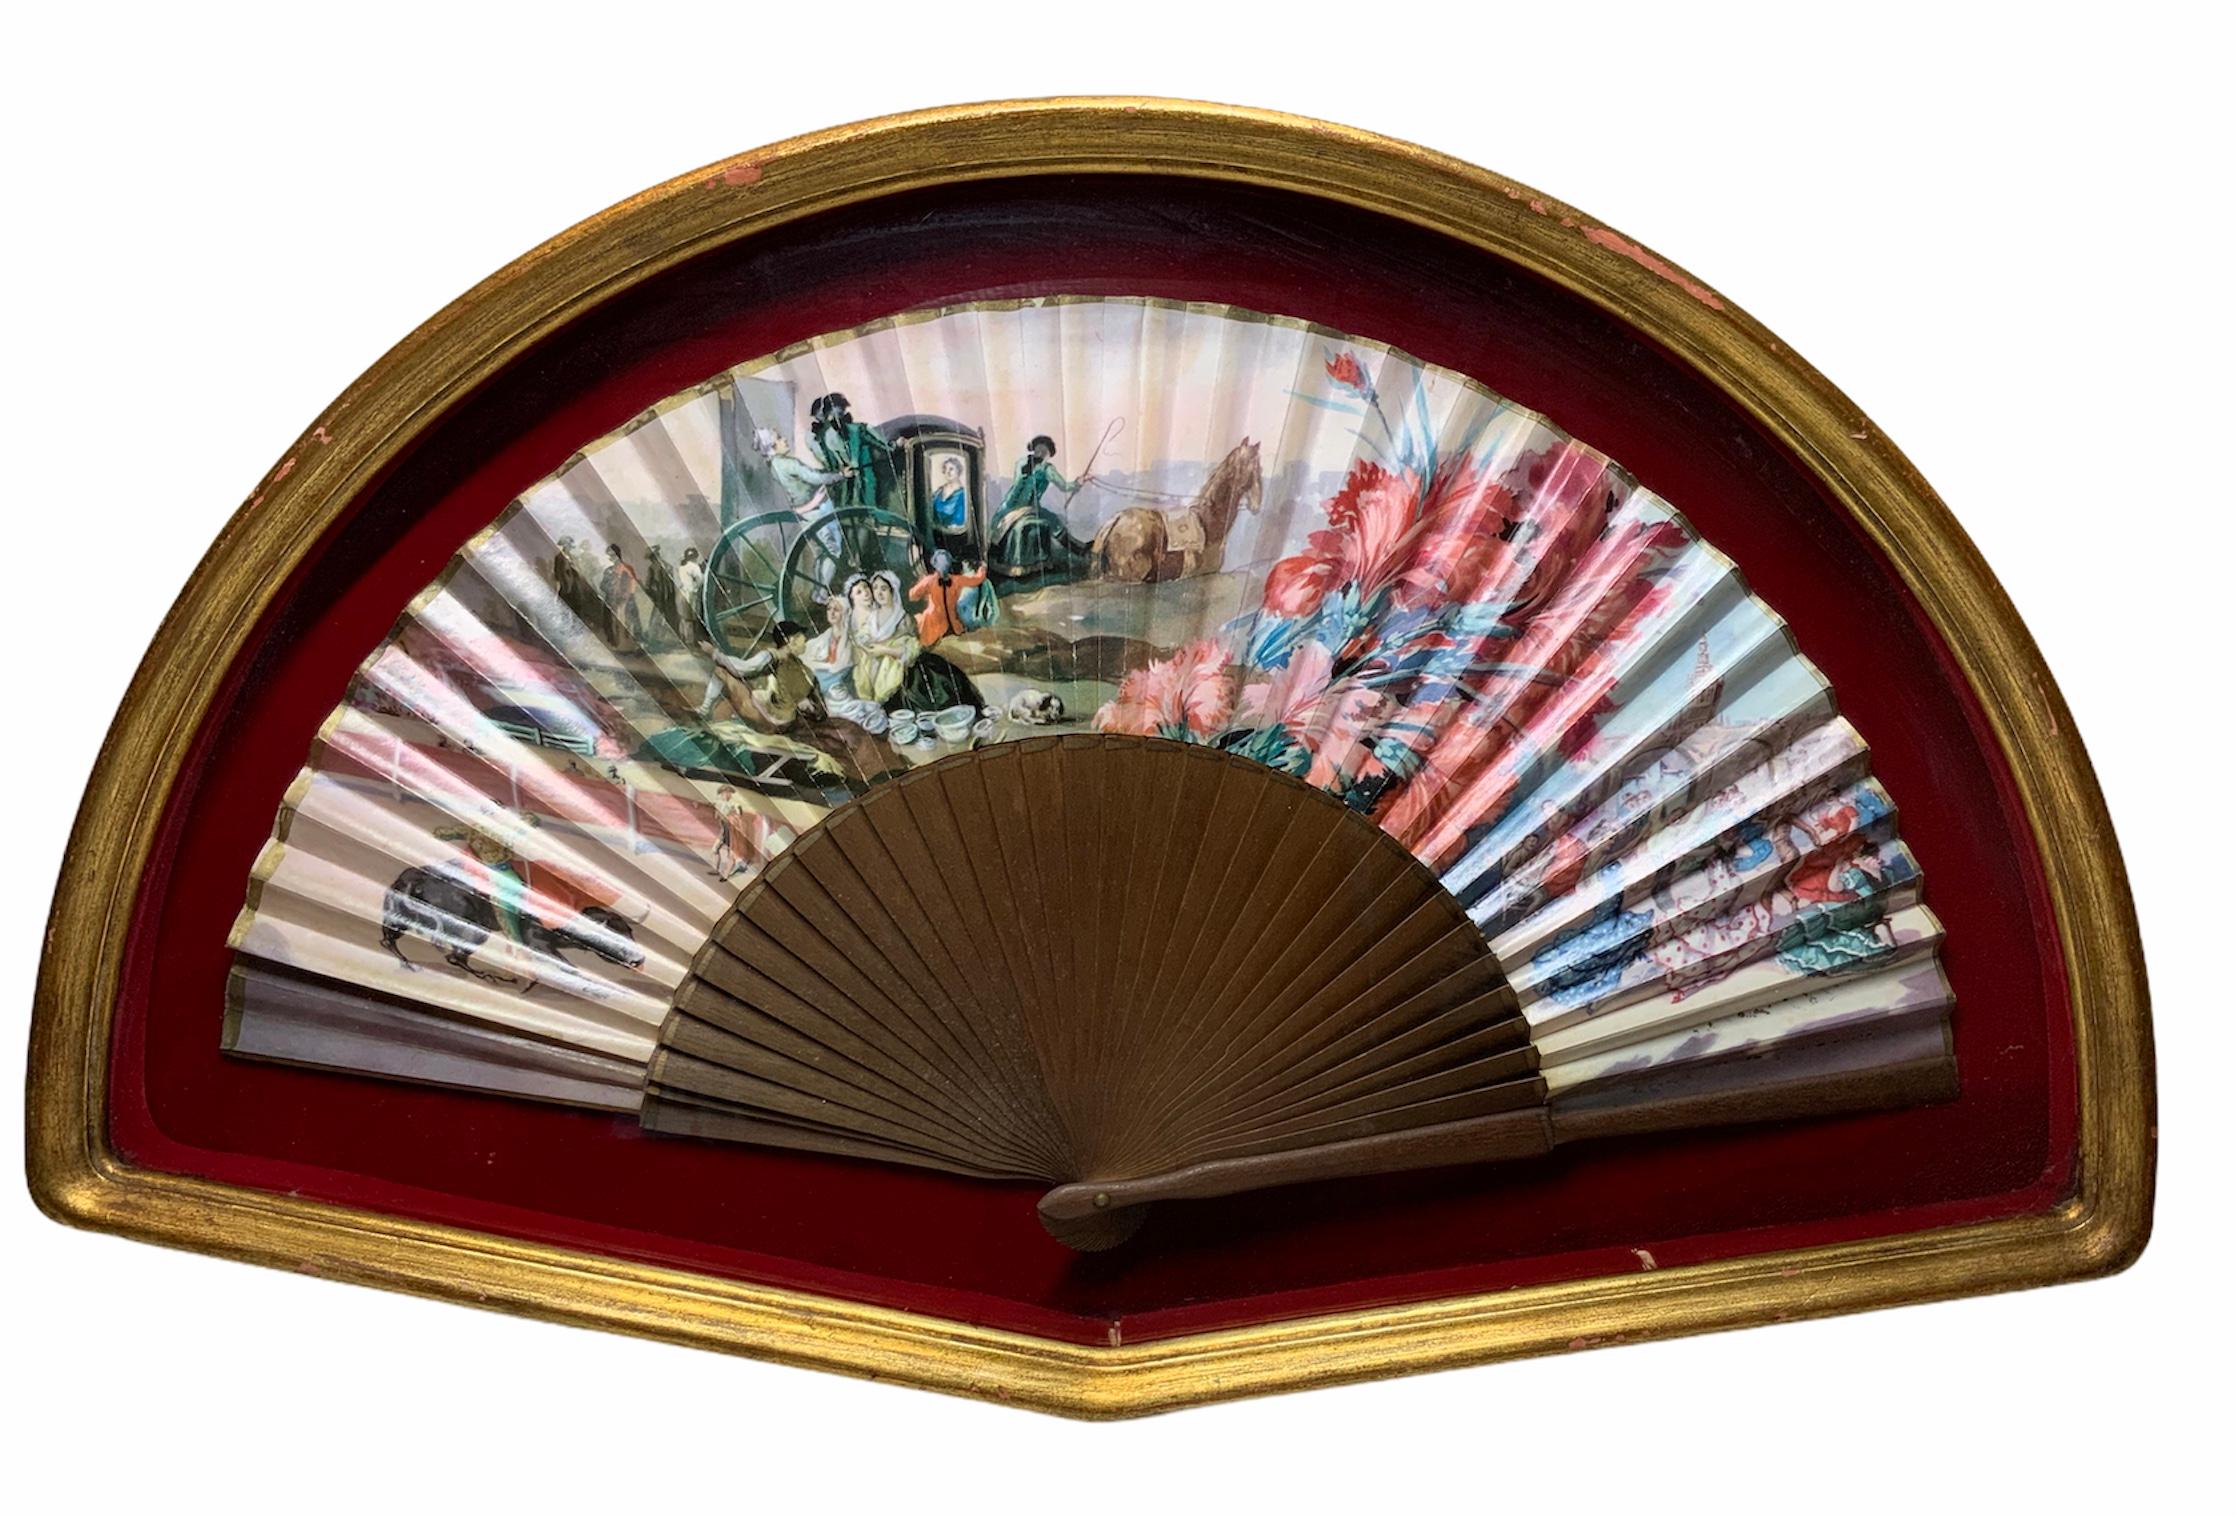 This is a wood sticks and handpainted Spaniard fan. It depicts four different scenes related to Spain. Starting in the left, there is a bullfighter fighting a bull in a bullring; then an 18th Century scene of a horse carriage with a lady inside it